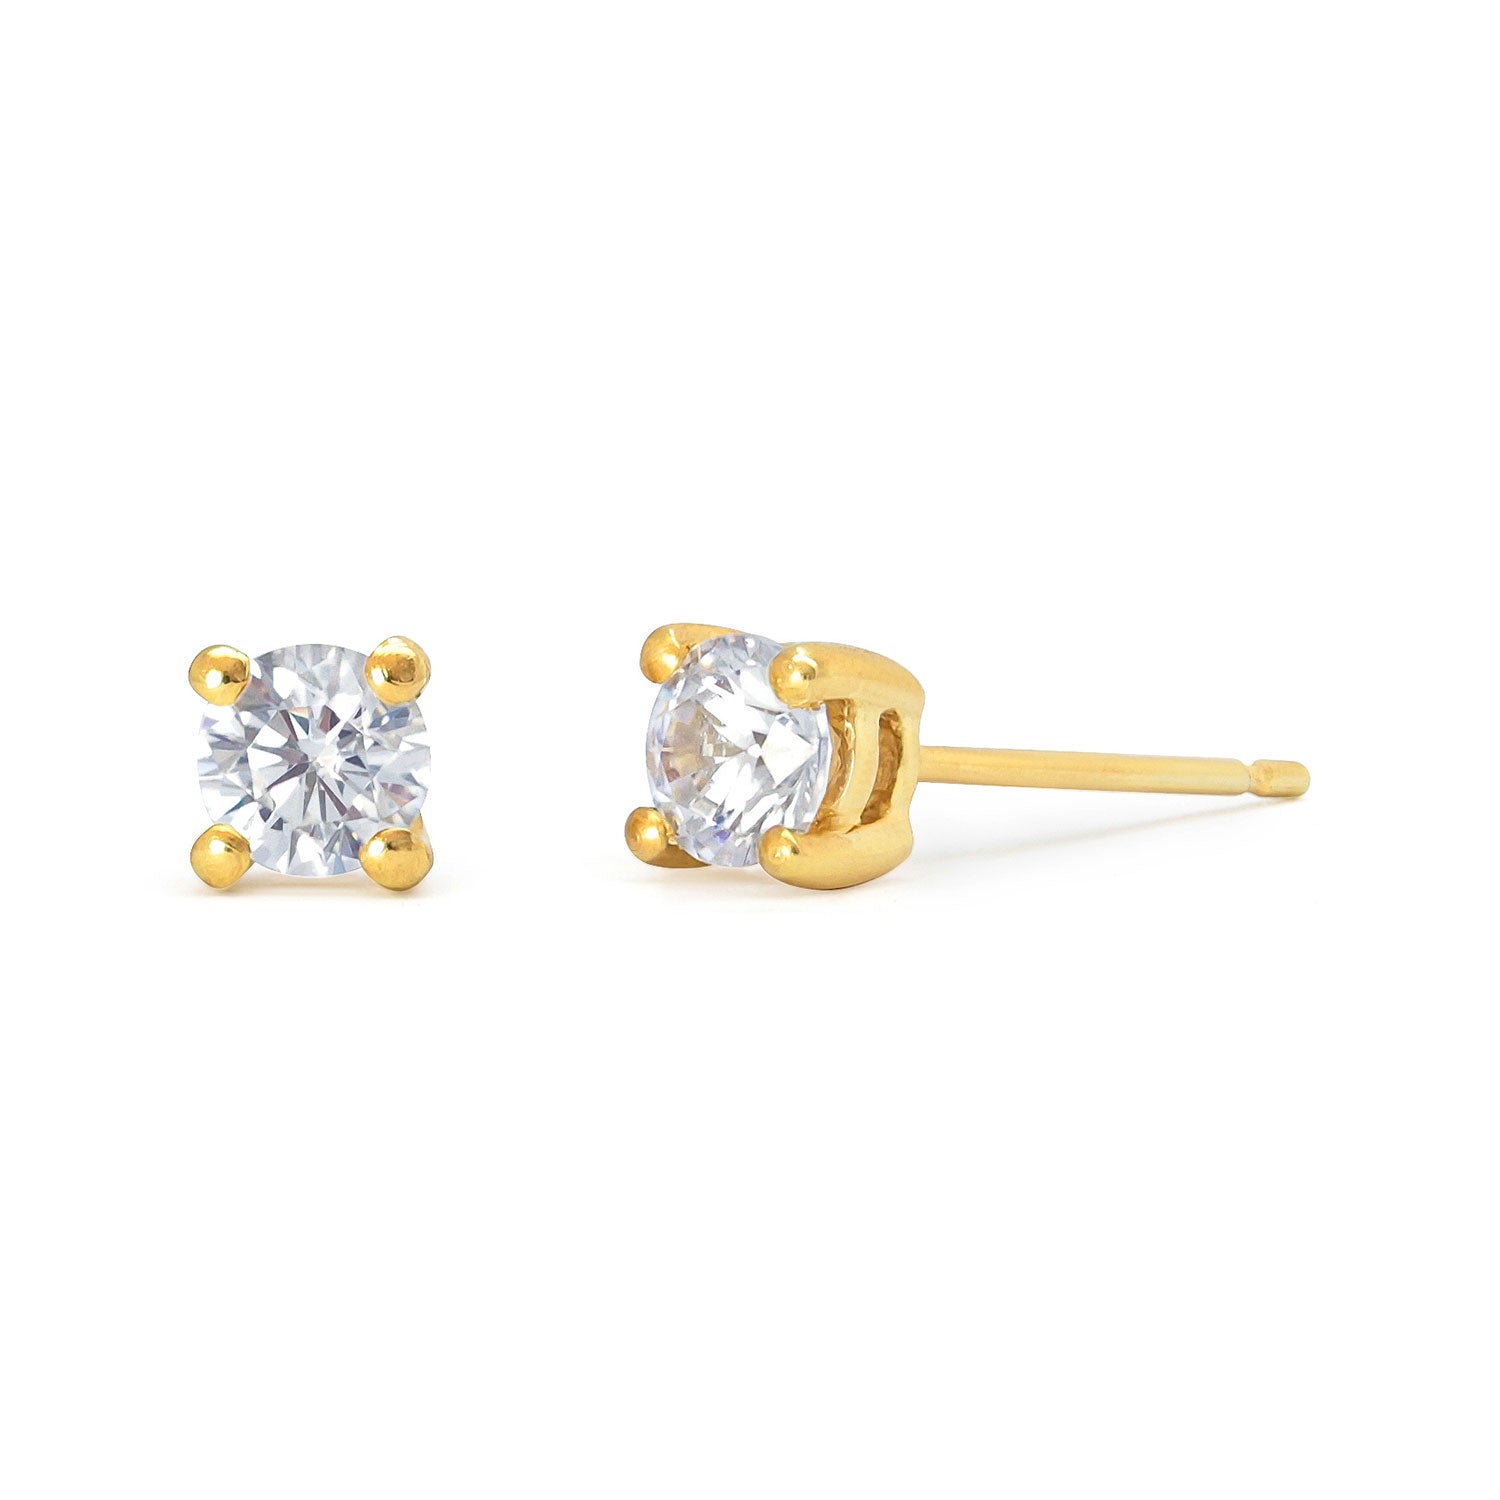 Lebrusan Studio claw-set stud earrings with milgrain beading - 18ct yellow Fairtrade Gold and 0.5ct of recycled diamonds